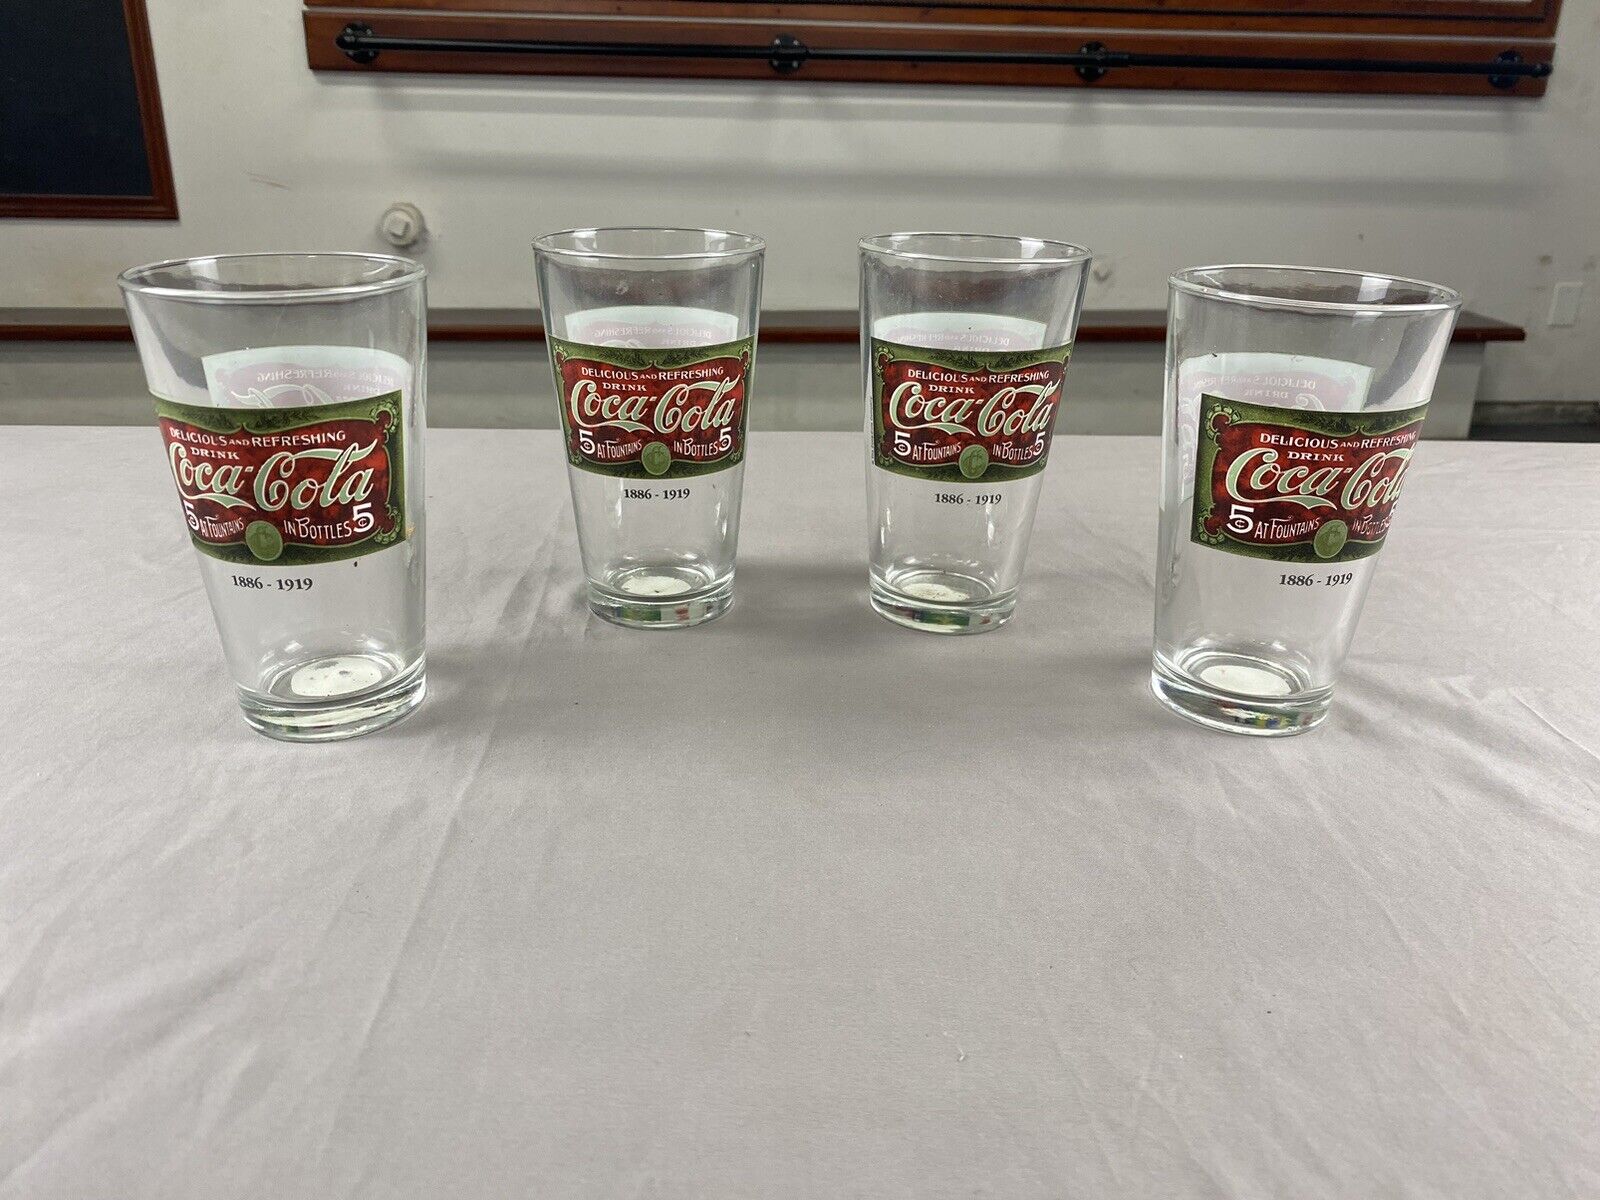 Set Of 4 Vintage Coca-Cola Glasses 16oz 1886-1919 Delicious And Refreshing 5cent